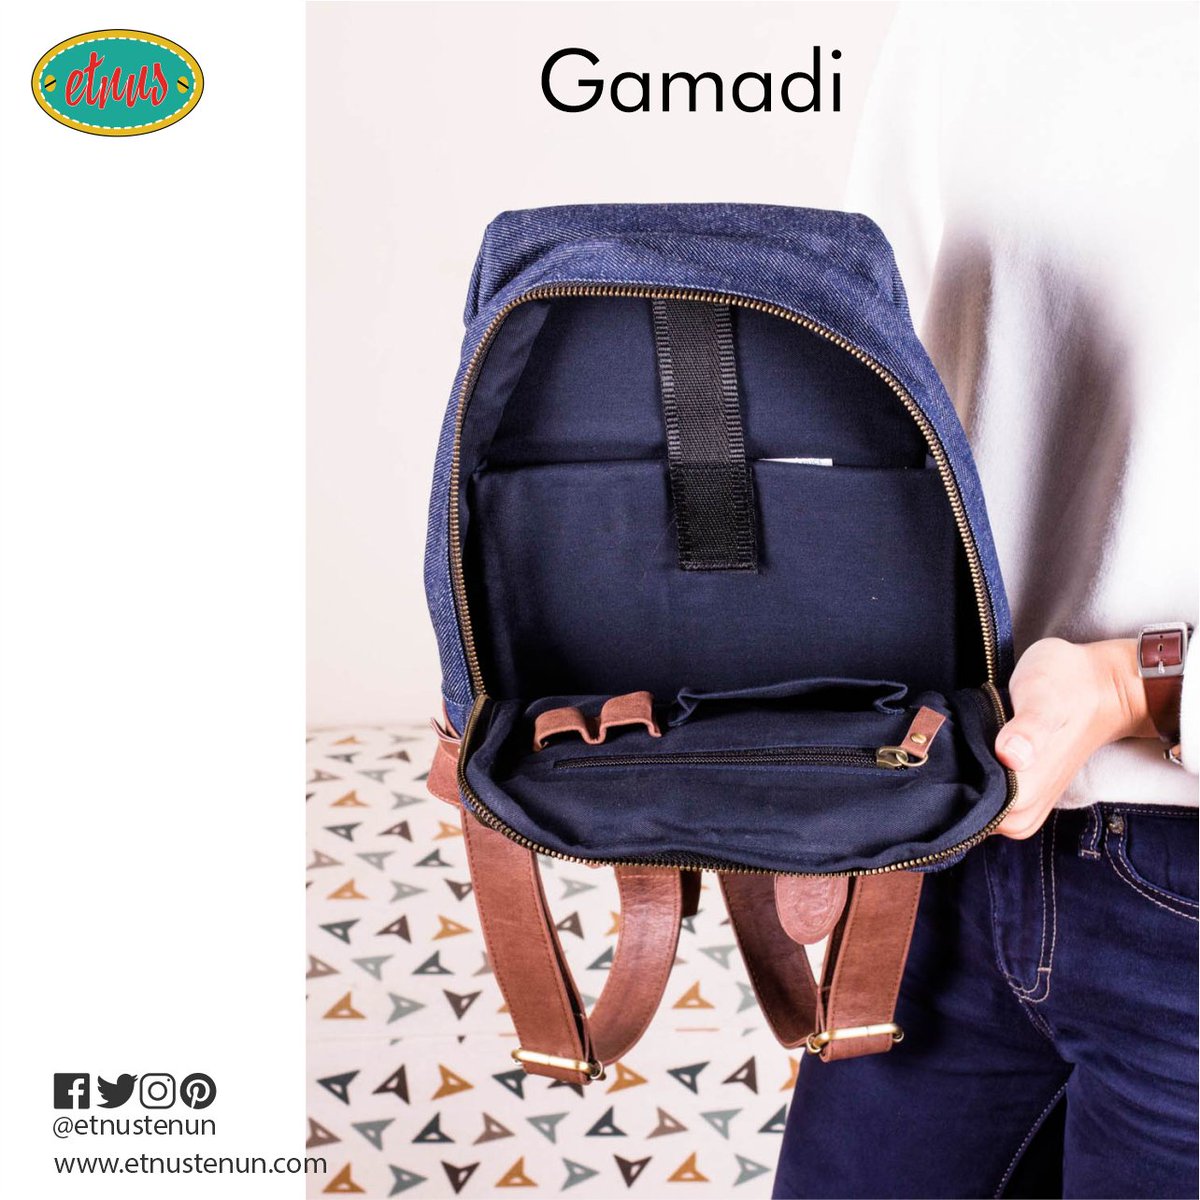 Keep it amazing by pairing your favorite casual daily look with a denim backpack; which adds an extra dimension to the look.
#casualbag
#backpackforwoman
#casualbackpack
#casualstyle
#ethnicstyle
#denimbag
#tasetnik
#tasranselwanita
#giniginigoonline